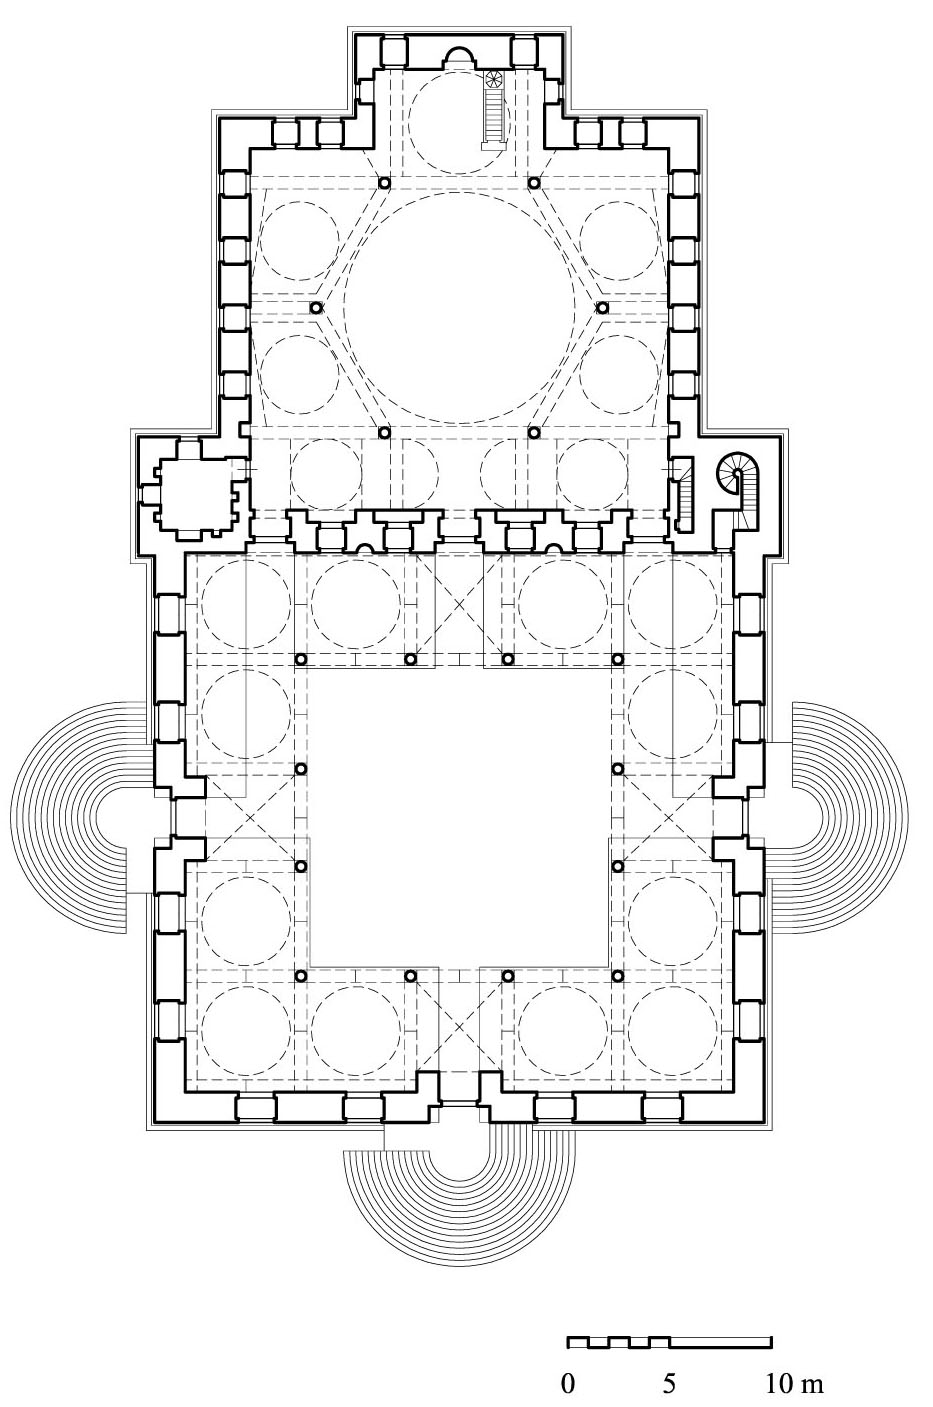 Masjid al-Malika Safiyya - Floor plan of mosque. DWG file in AutoCAD 2000 format. Click the download button to download a zipped file containing the .dwg file.